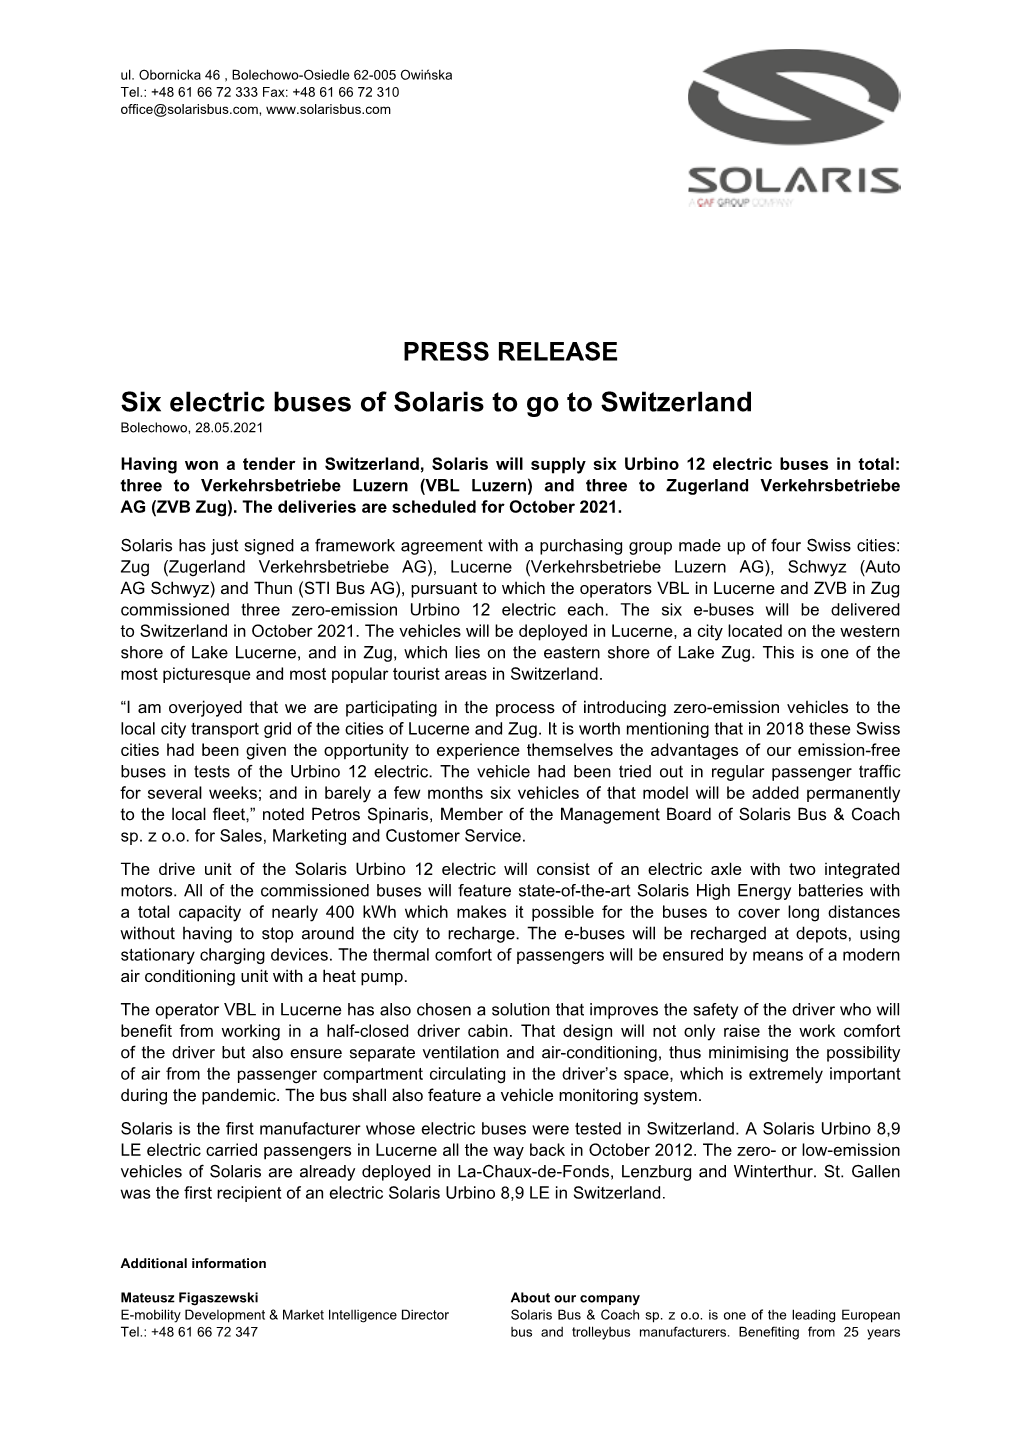 PRESS RELEASE Six Electric Buses of Solaris to Go to Switzerland